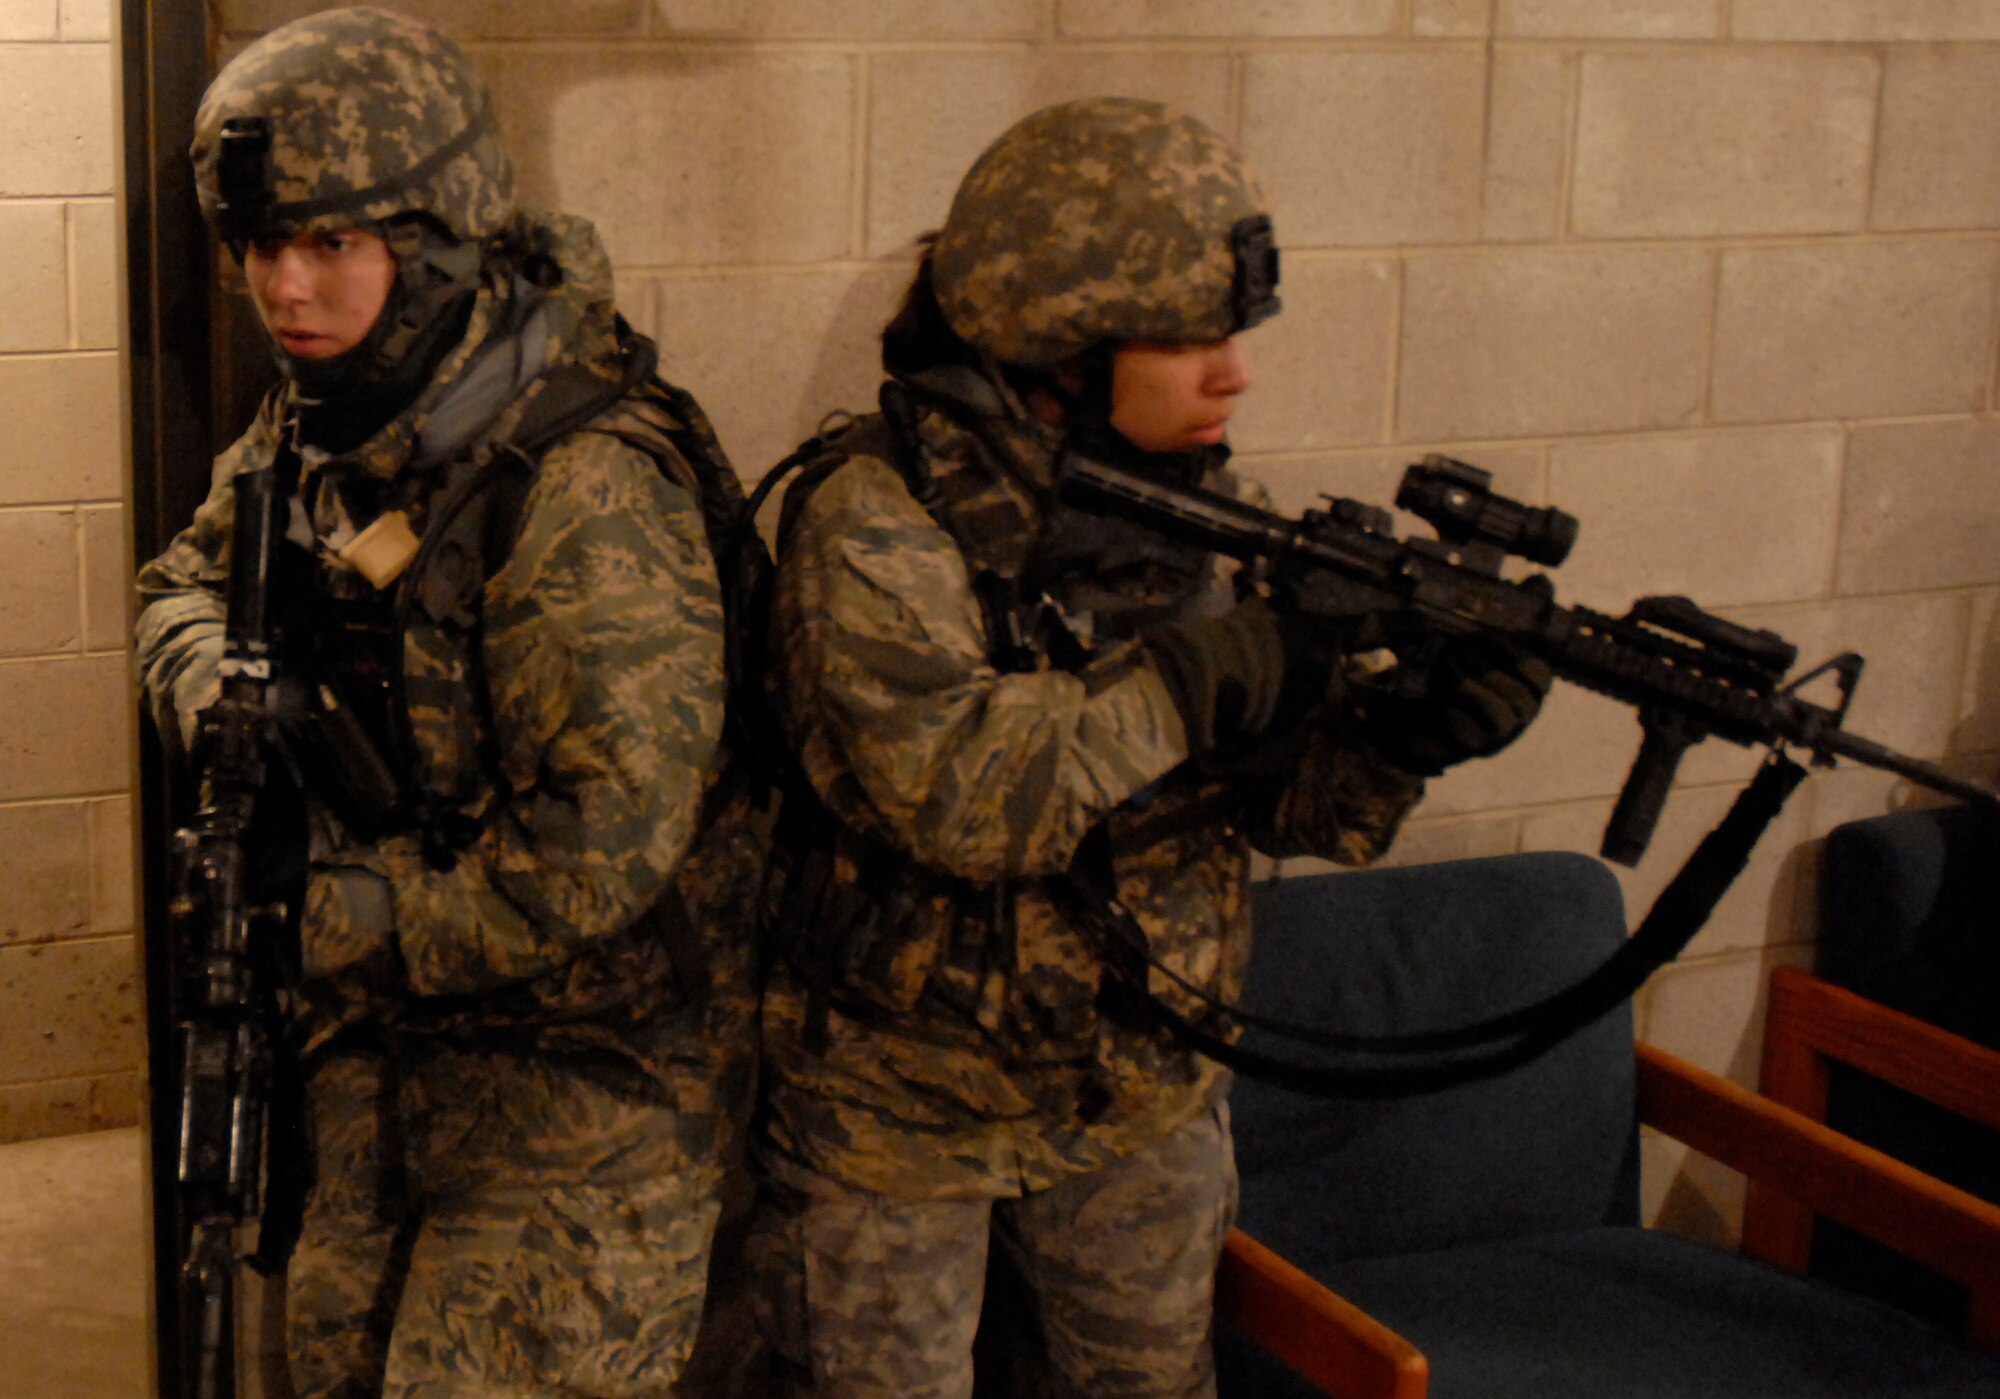 Senoir Airmen Jenelle Christian and Yesenia Luna from the 7th Security Forces Squadron, Dyess AFB, Texas stack up to prepare for a room entry during urban operations training as part of their pre-deployment training hosted by the U.S. Air Force Expeditionary Center, Joint Base McGuire-Dix-Lakehurst, N.J. March 13, 2010. The training is conducted by the 421st Combat Training Squadron. (U.S. Air Force Photo/Tech. Sgt. Paul R. Evans)